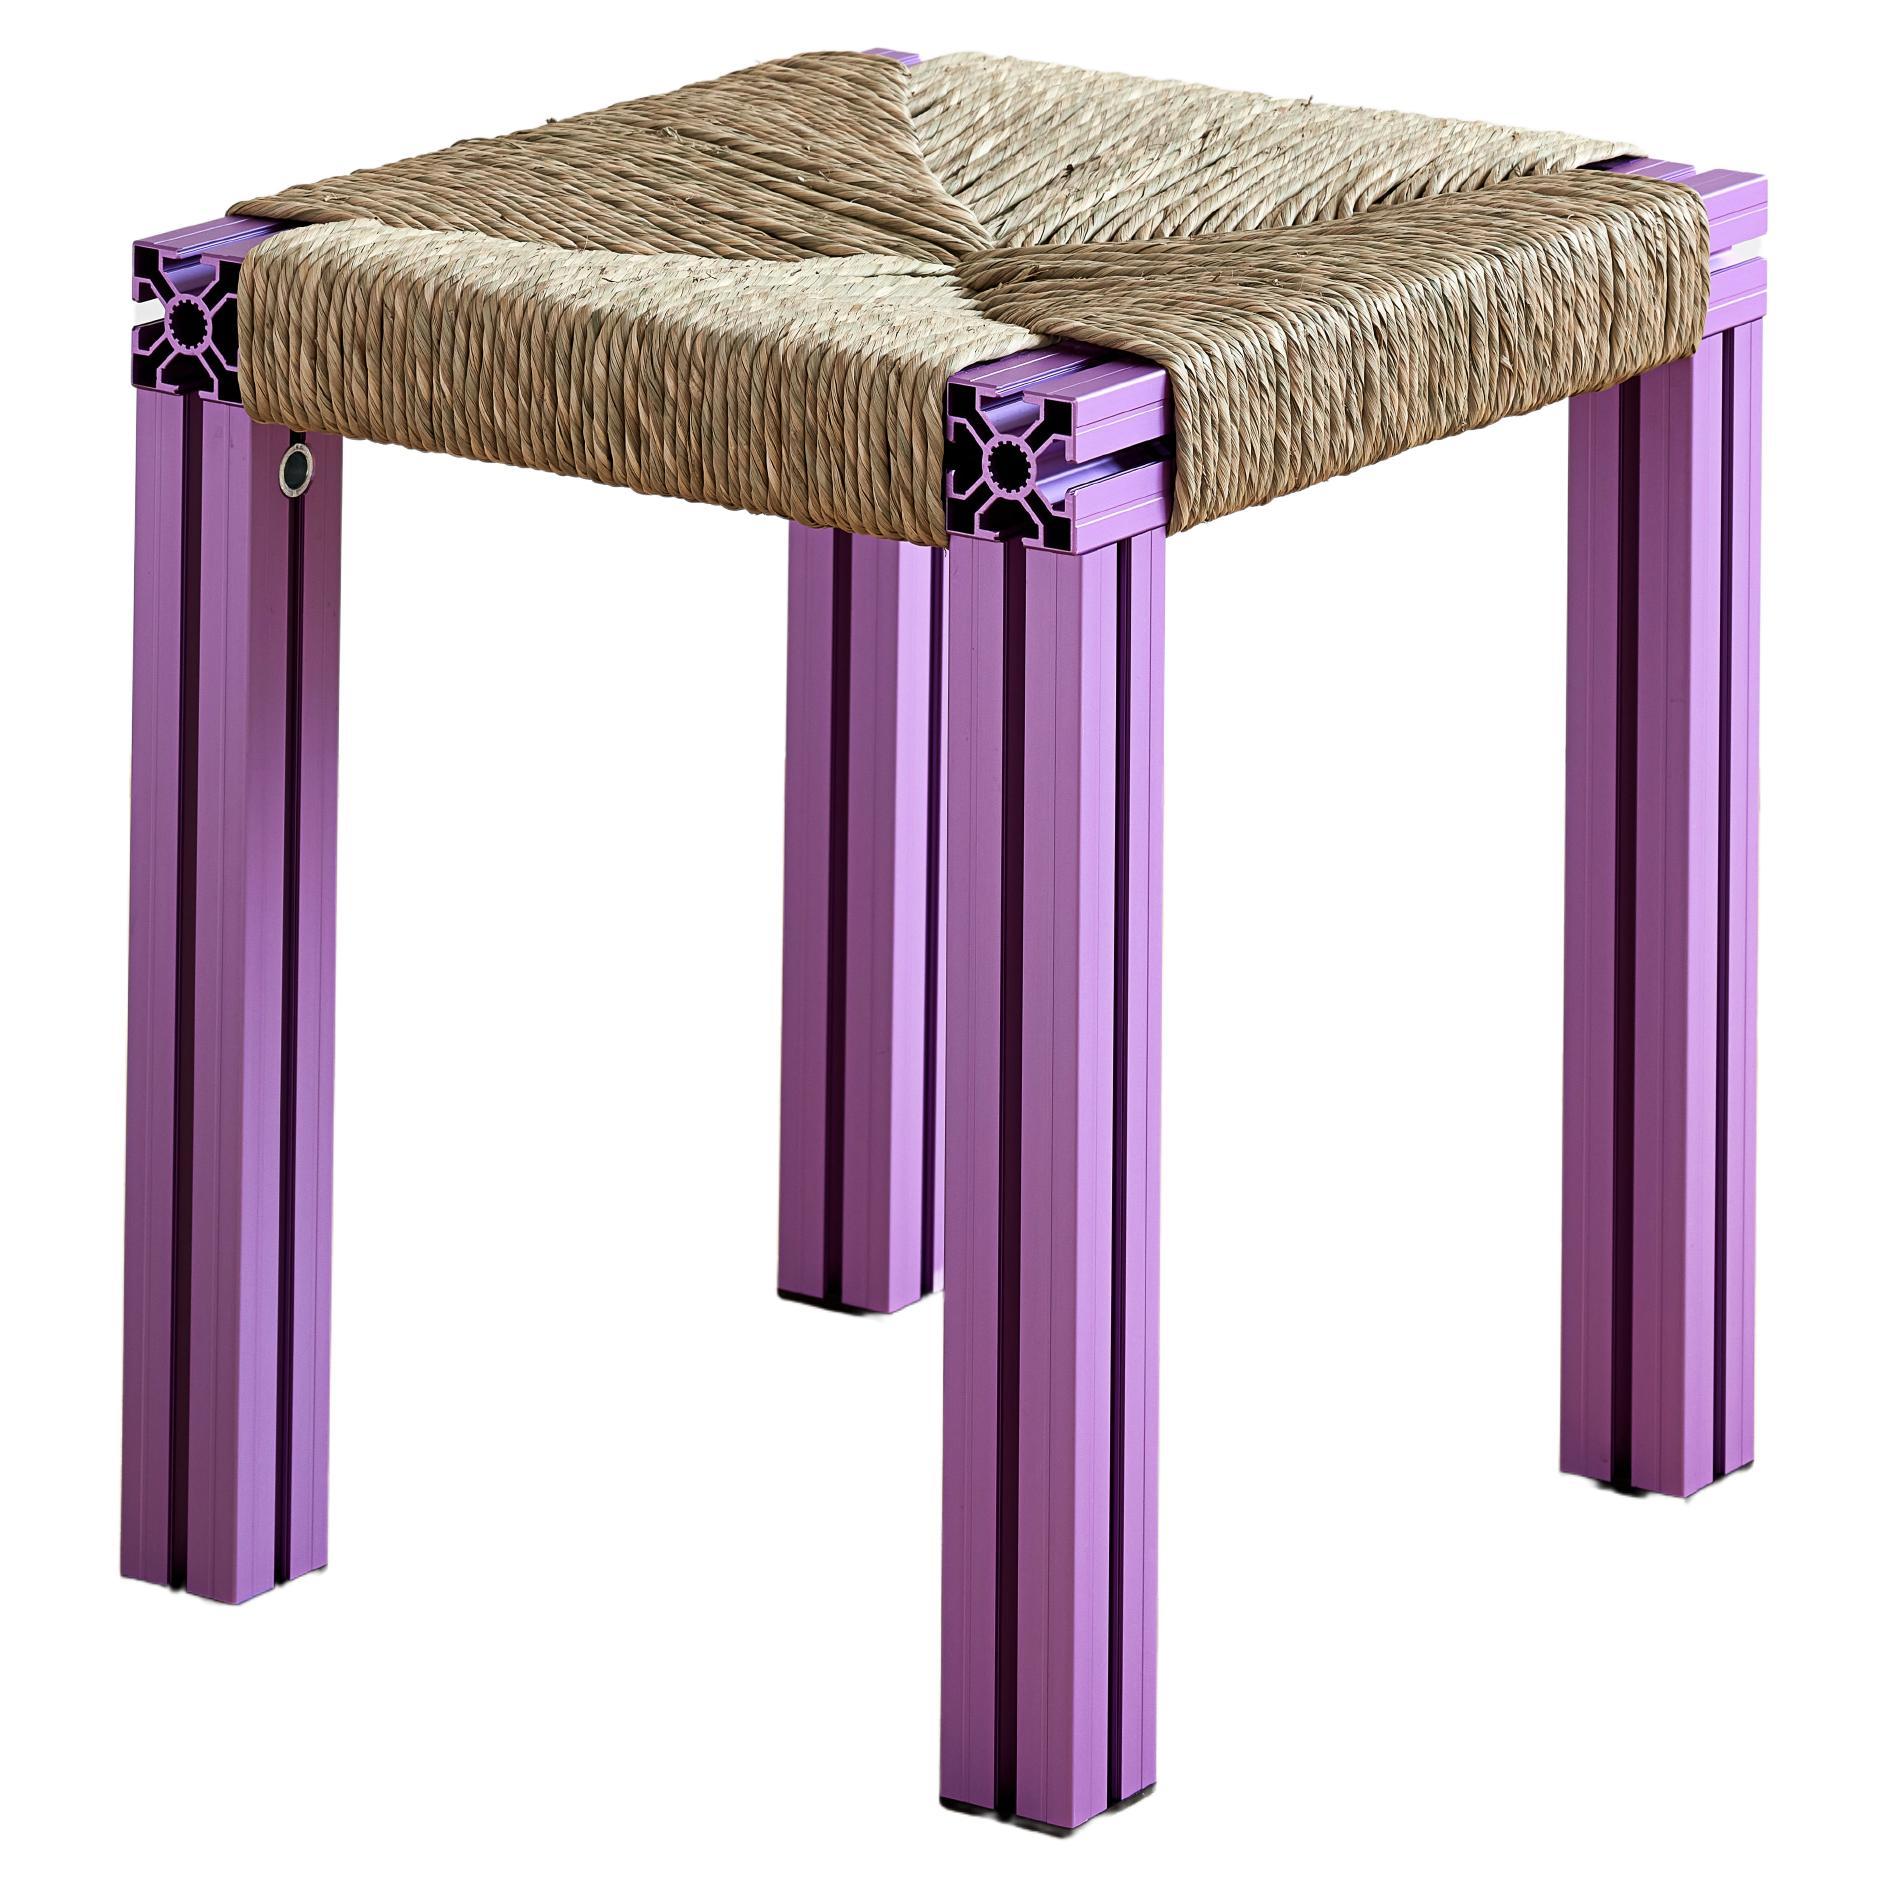 Lavender Aluminium Stool with Reel Rush Seating from Anodised Wicker Collection For Sale